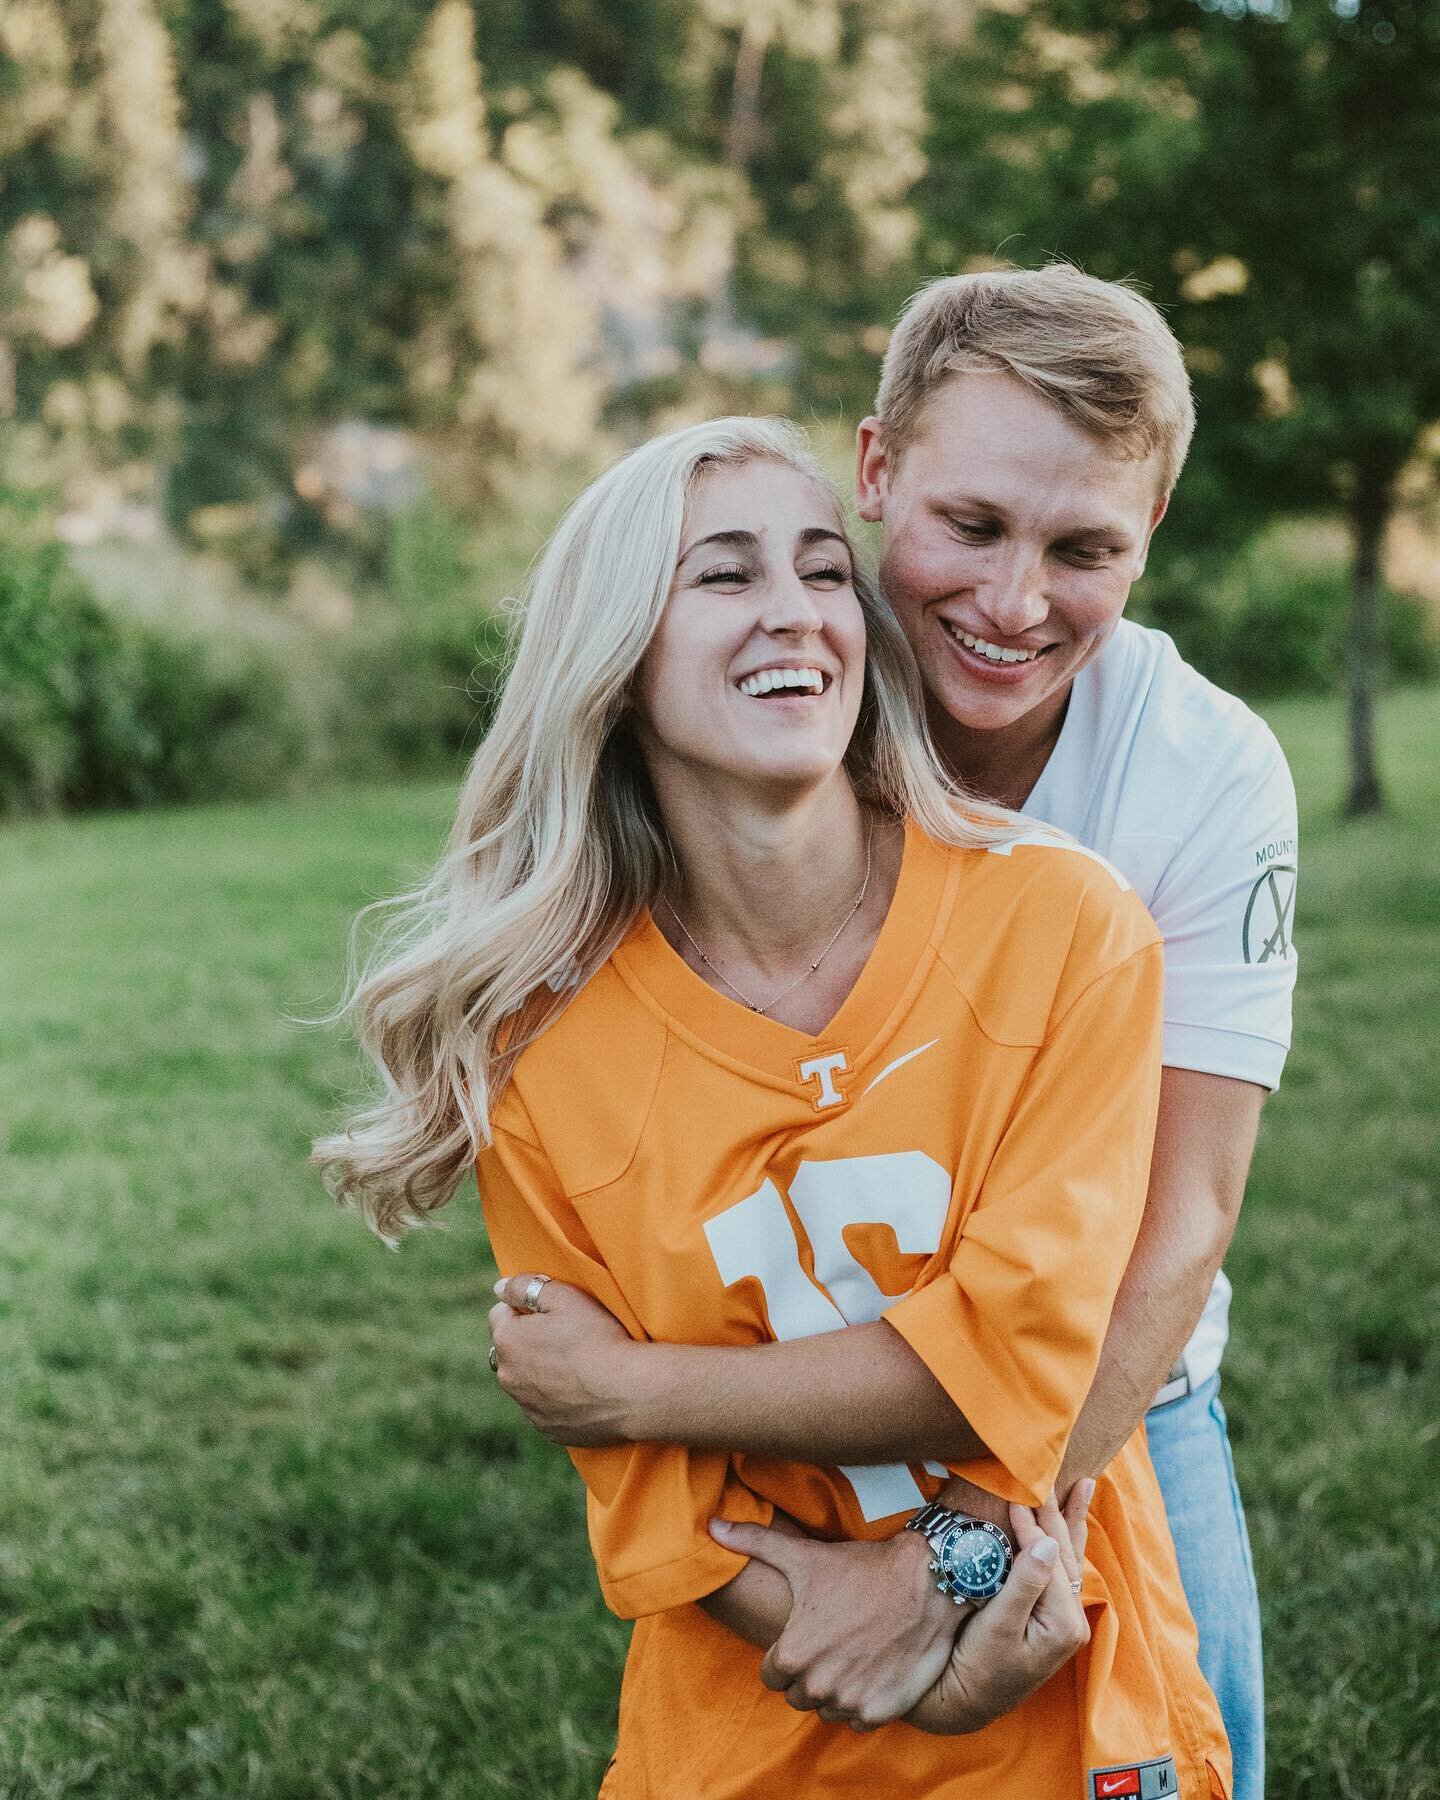 Now that we&rsquo;re getting back into the swing of football I figured it would be a good time to share these! Fun fact, I&rsquo;m a huge Tennessee Vols fan.

These just make my heart happy. Loren is a long time friend of mine. She&rsquo;s got a heart of gold and is an all around amazing person. I had never met Will before, but I knew he had to be pretty incredible to be with Loren. You guys. These two just made me melt 😍
-
-
-
-
#dcweddingphotographer #dcwedding #annigrahampresets #dcportraitphotographer #mdportraitphotographer #mdweddingphotographer #vaweddingphotographer